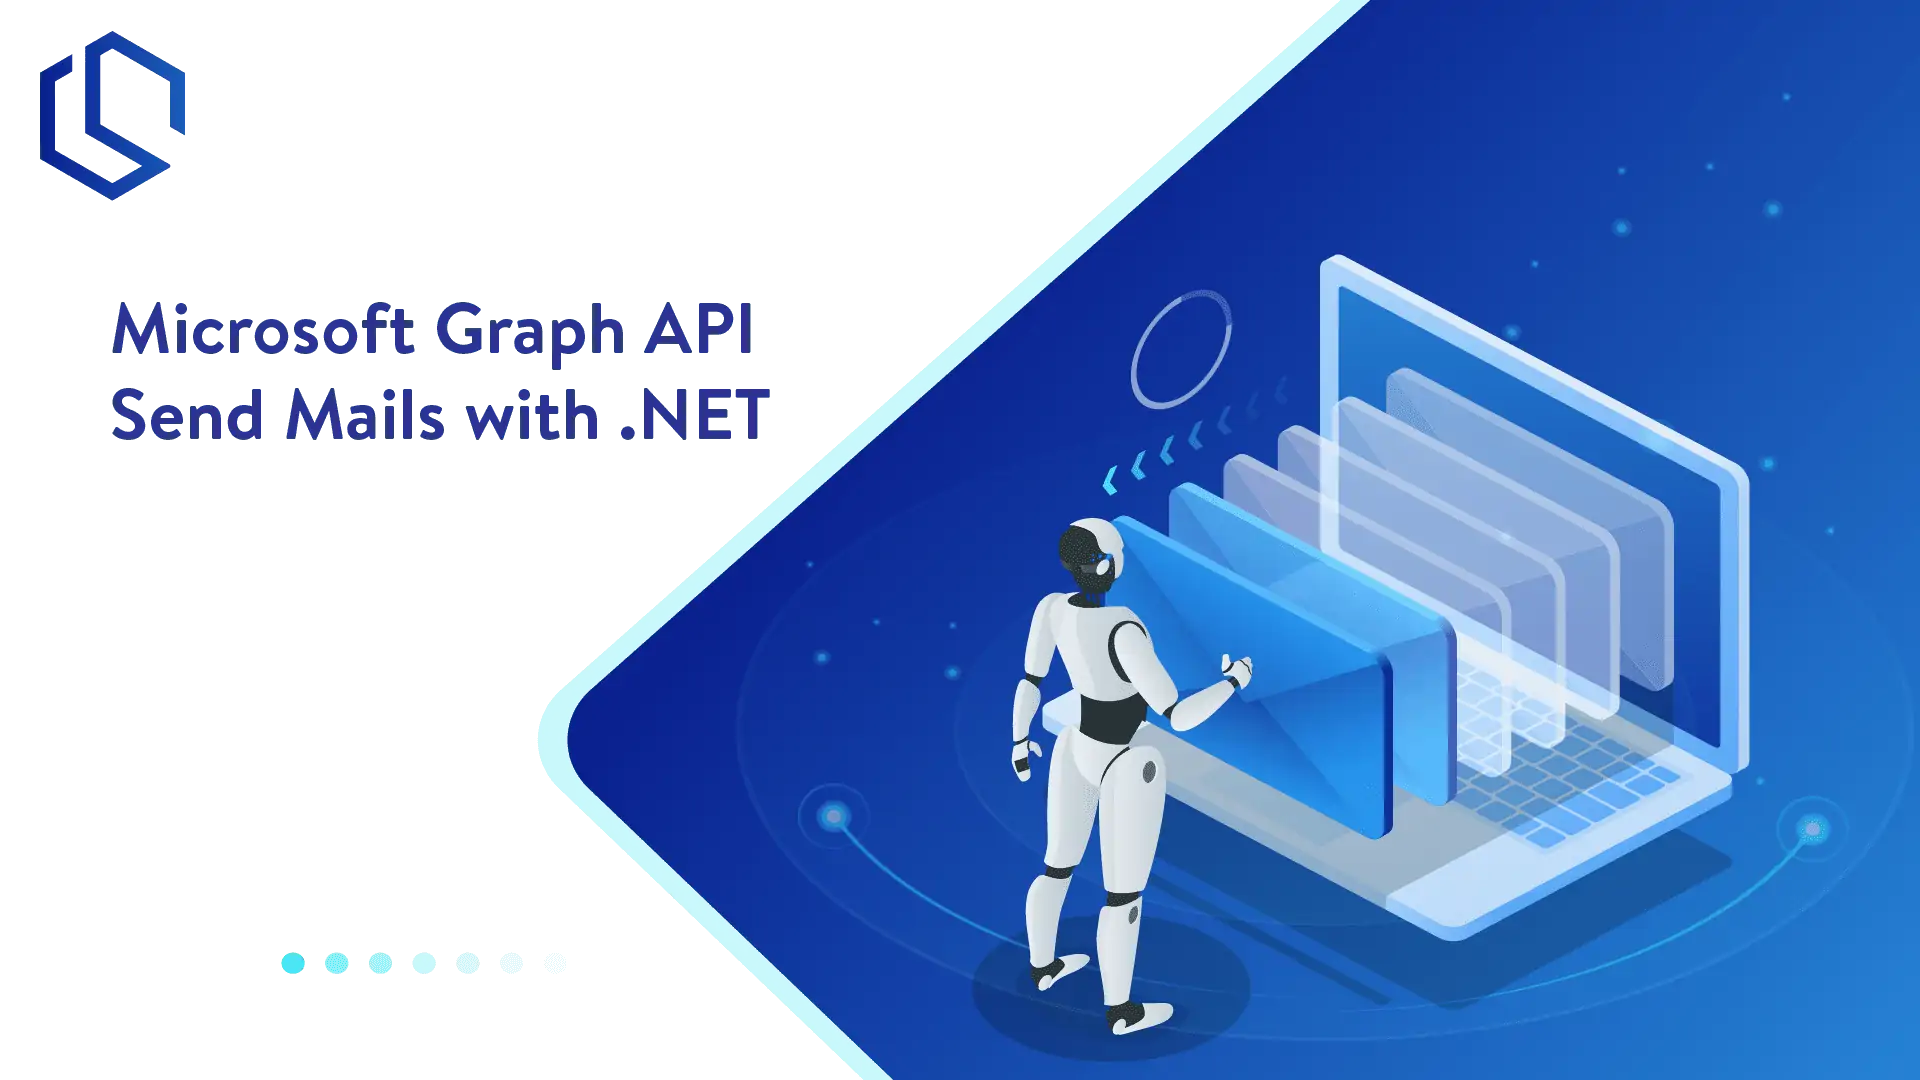 Send emails using Microsoft Graph API in .NET